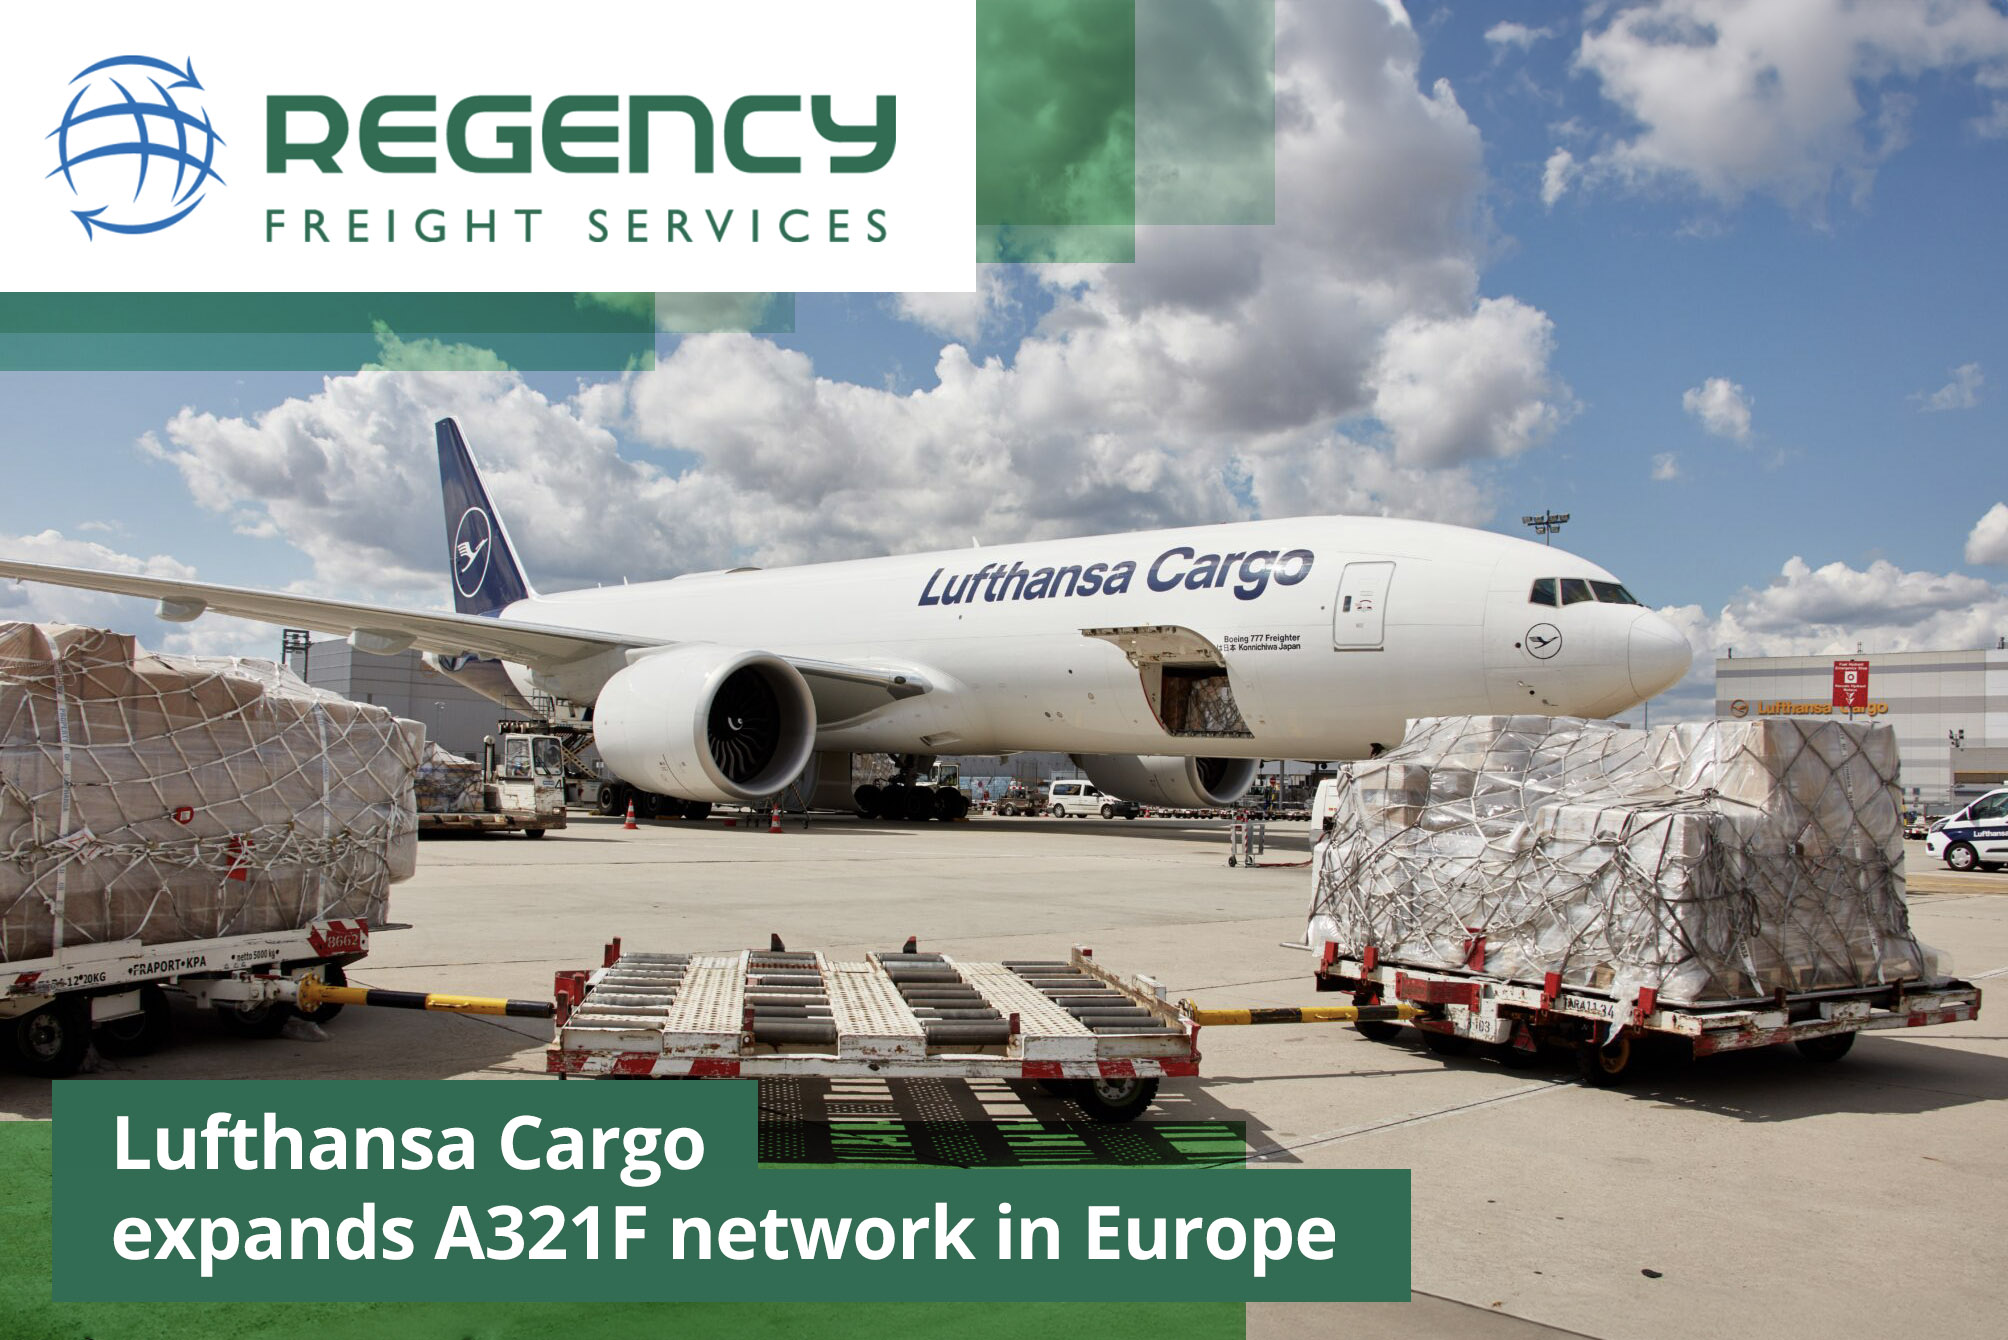 Lufthansa Cargo expands A321F network in Europe